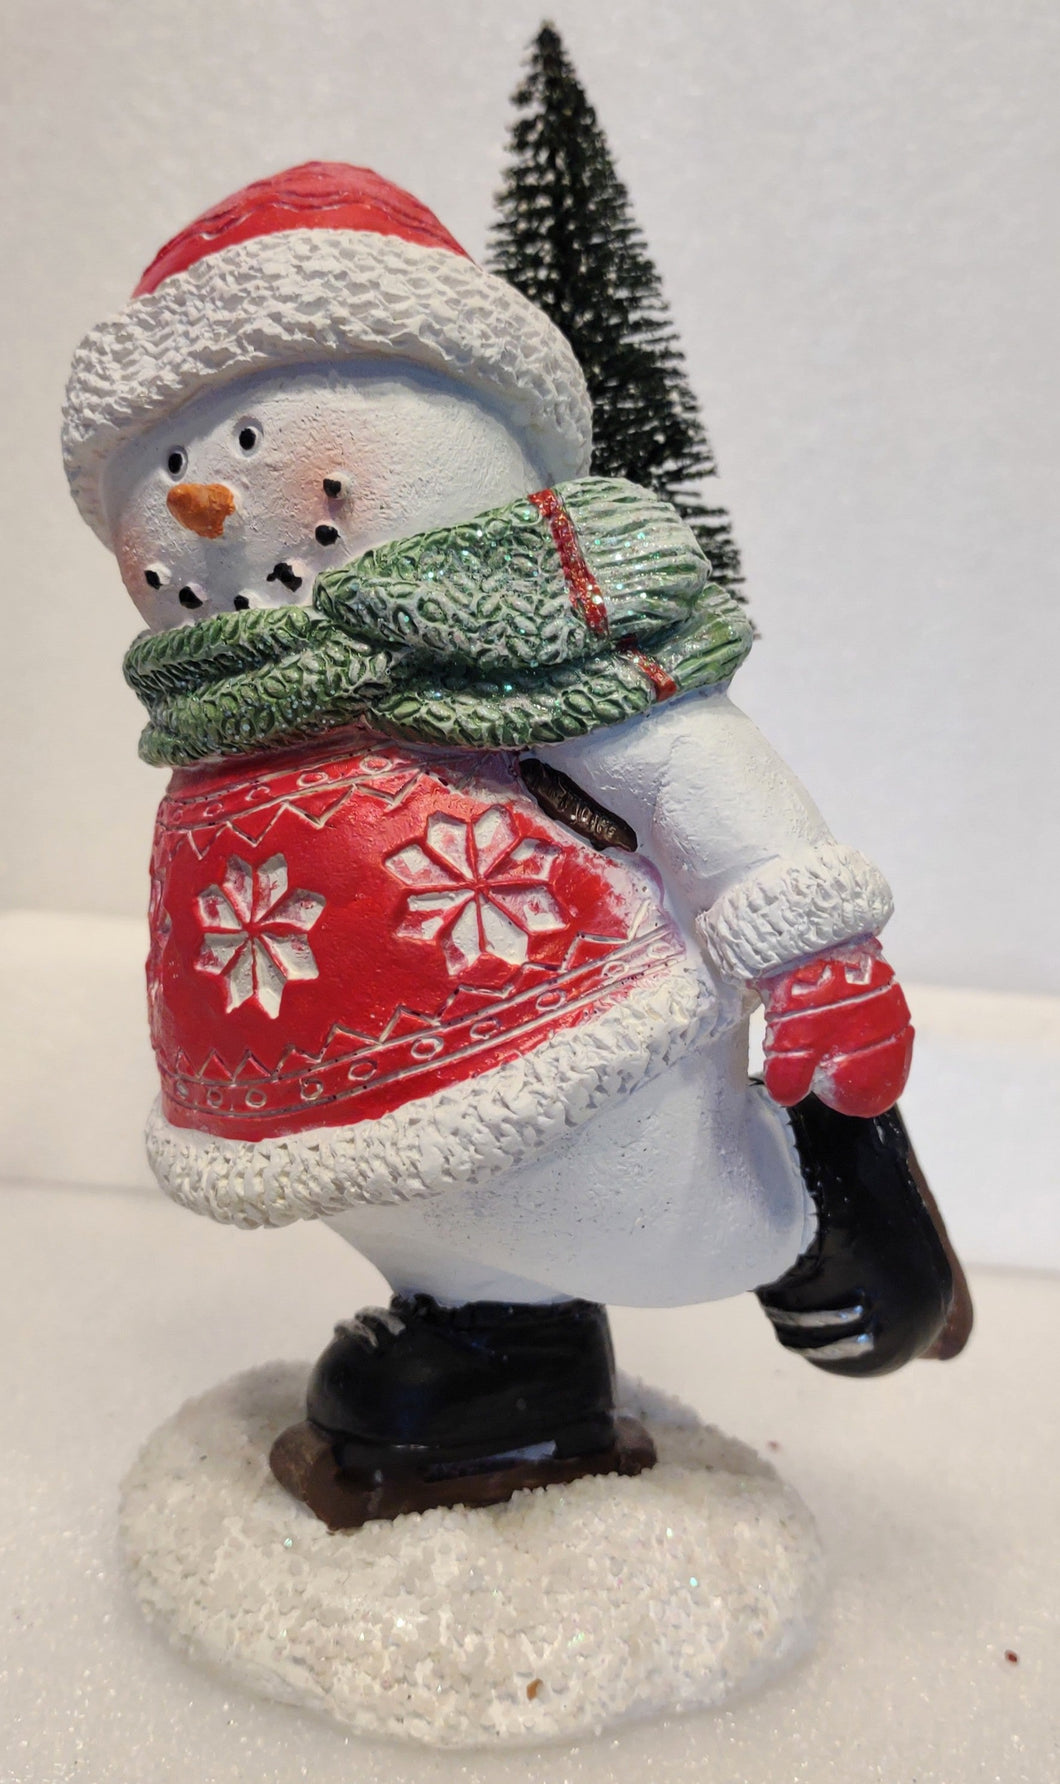 Skiing Snowman Figurine Wearing Red Jacket/Red Hat/Snowflakes with Backpack& Tree